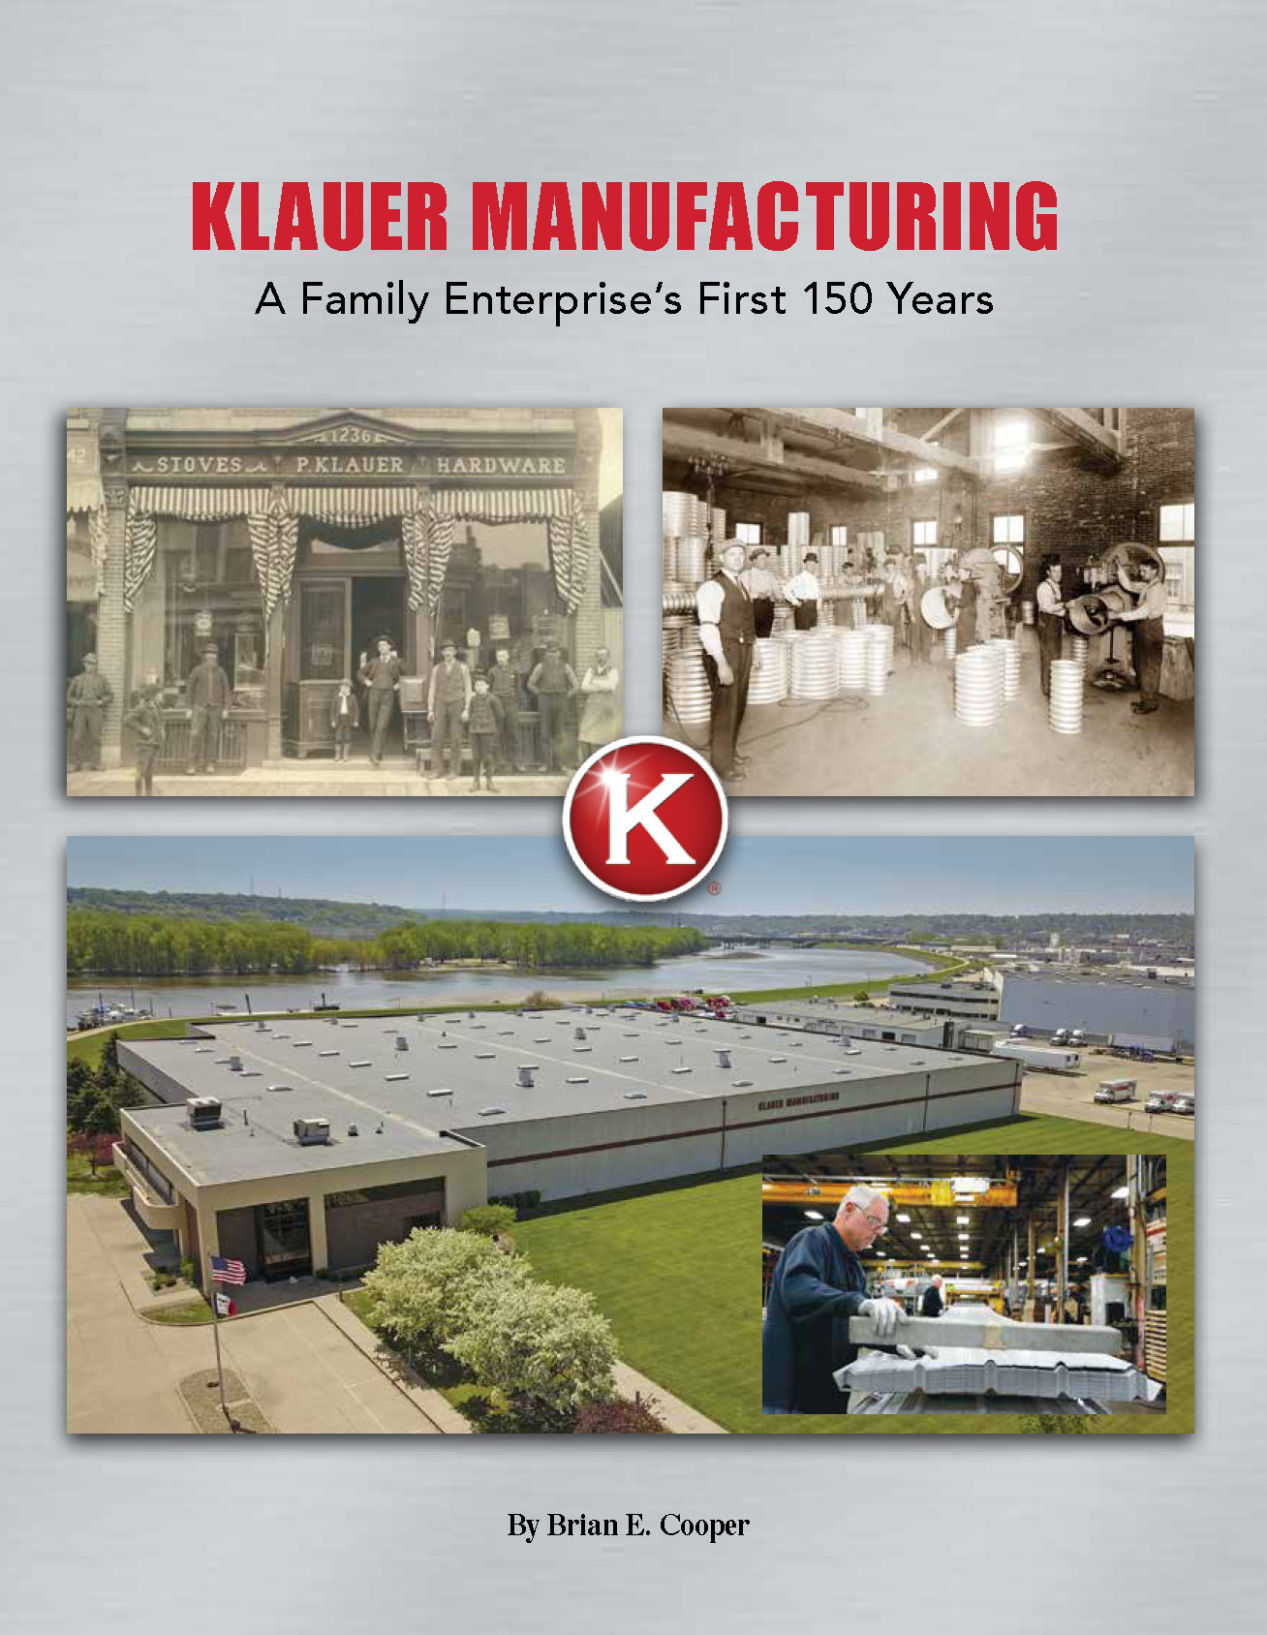 Klauer Manufacturing book cover    PHOTO CREDIT: Contributed